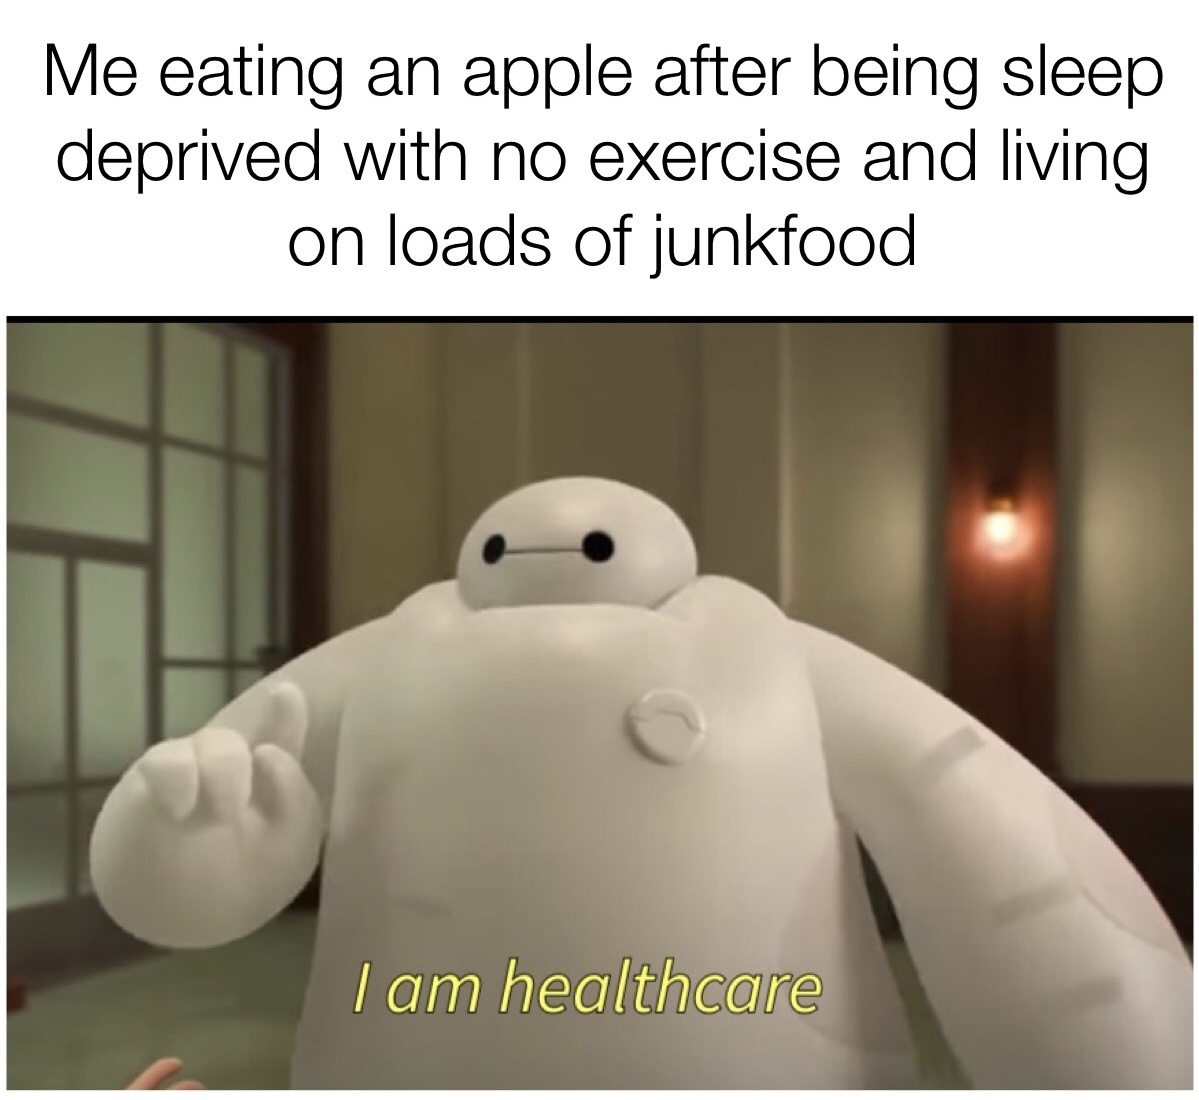 funny memes - Me eating an apple after being sleep deprived with no exercise and living on loads of junk food I am healthcare